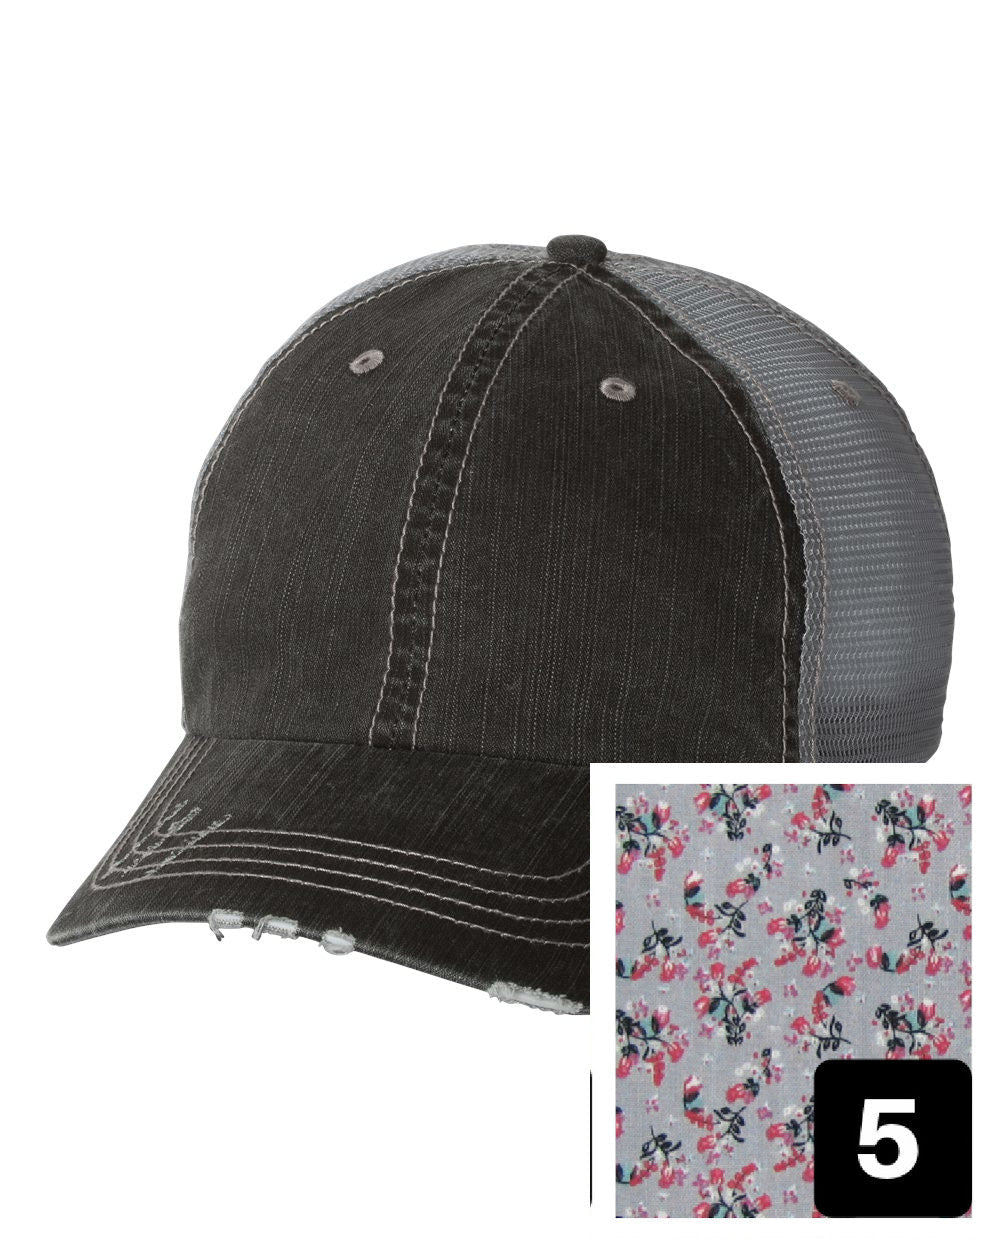 gray distressed trucker hat with purple and pink floral fabric state of Vermont